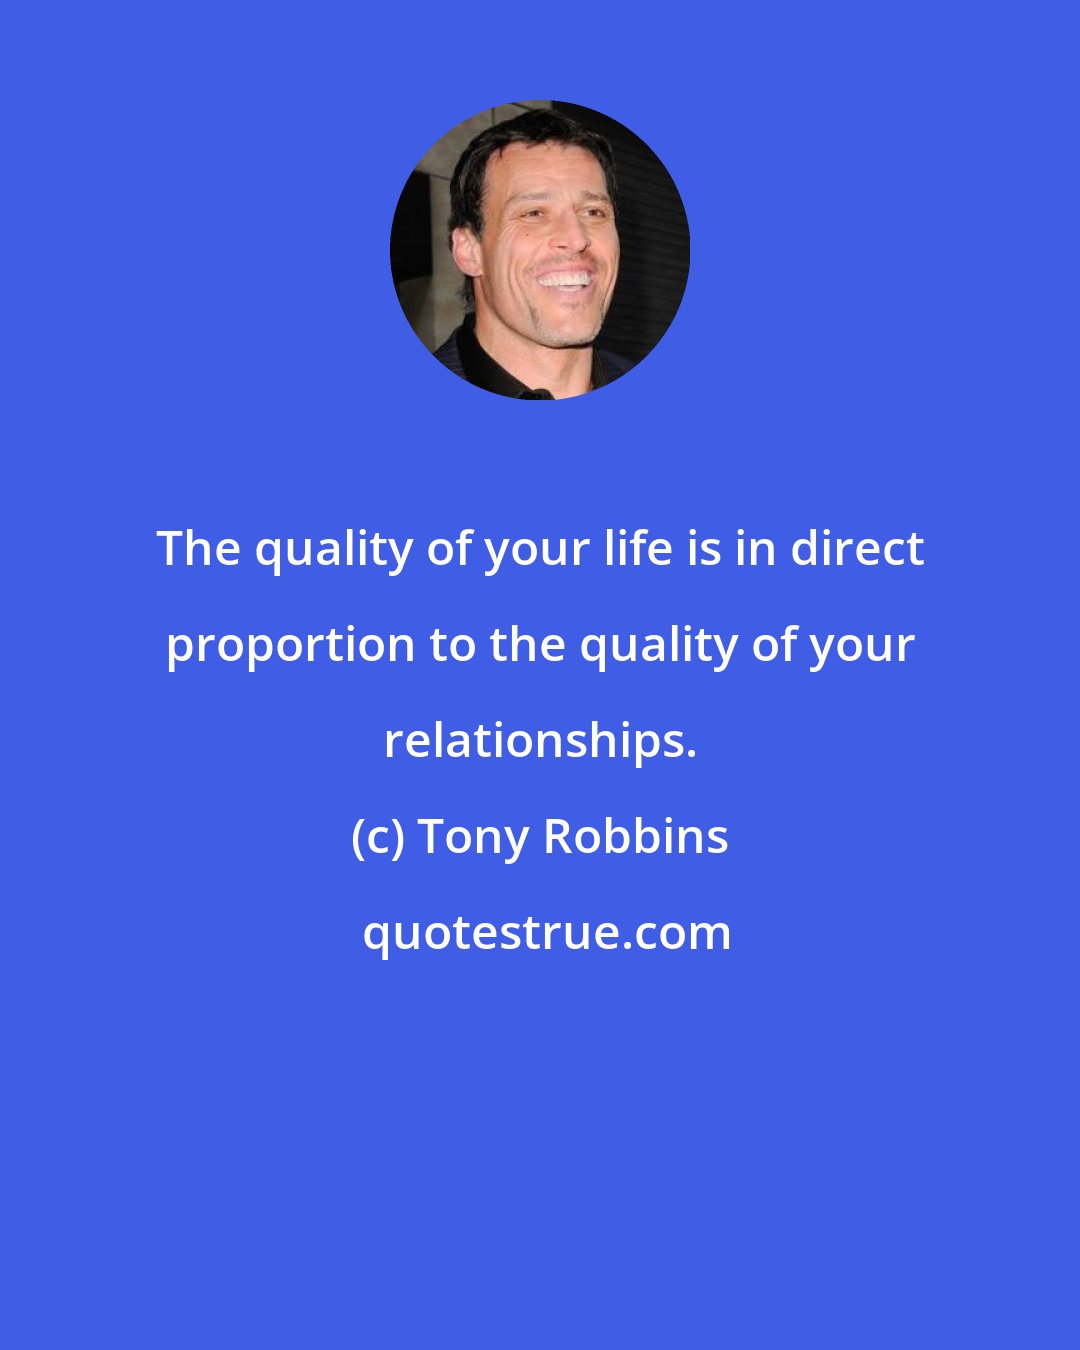 Tony Robbins: The quality of your life is in direct proportion to the quality of your relationships.